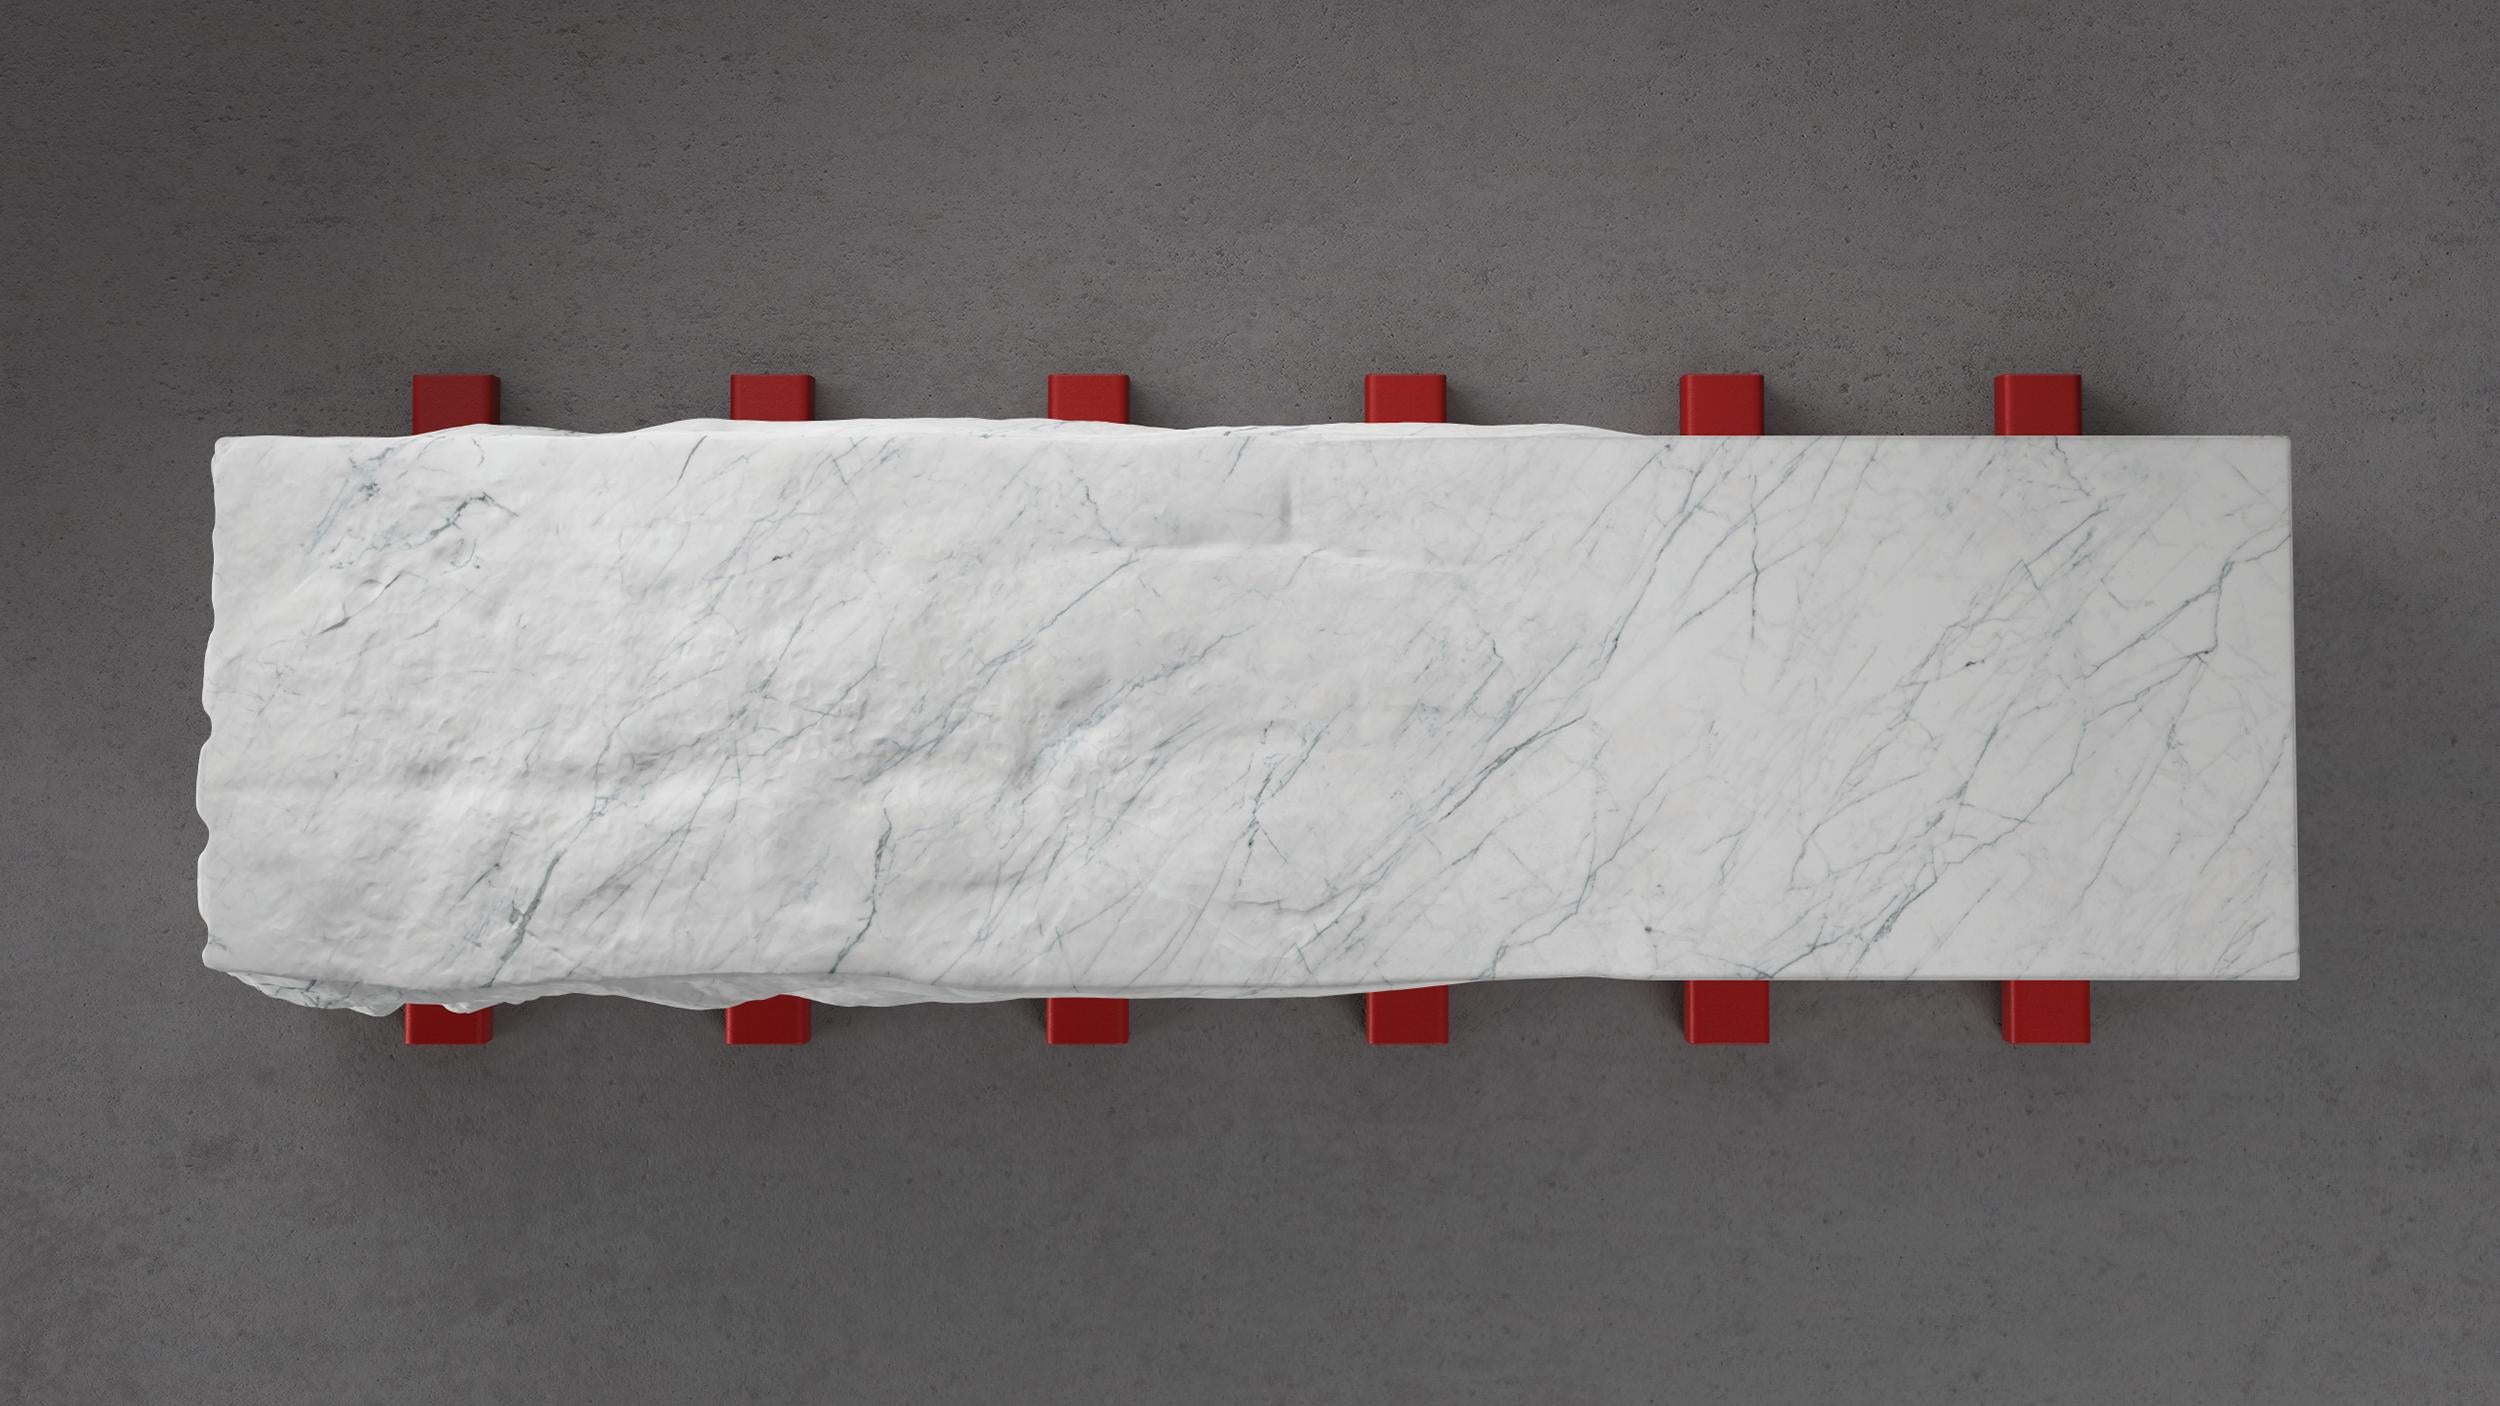 Serra Pelada Bench by Arthur Vallin
Limited 12 + 2 A/P
Dimensions: W 60 x D 20.5 x H 16.5 inch
Materials: Statuario Marble, Steel, Brass
Finishing: Hand sculpted Marble, Epoxy Painted Steel, Textured Brass

Other materials available.

French Artist,